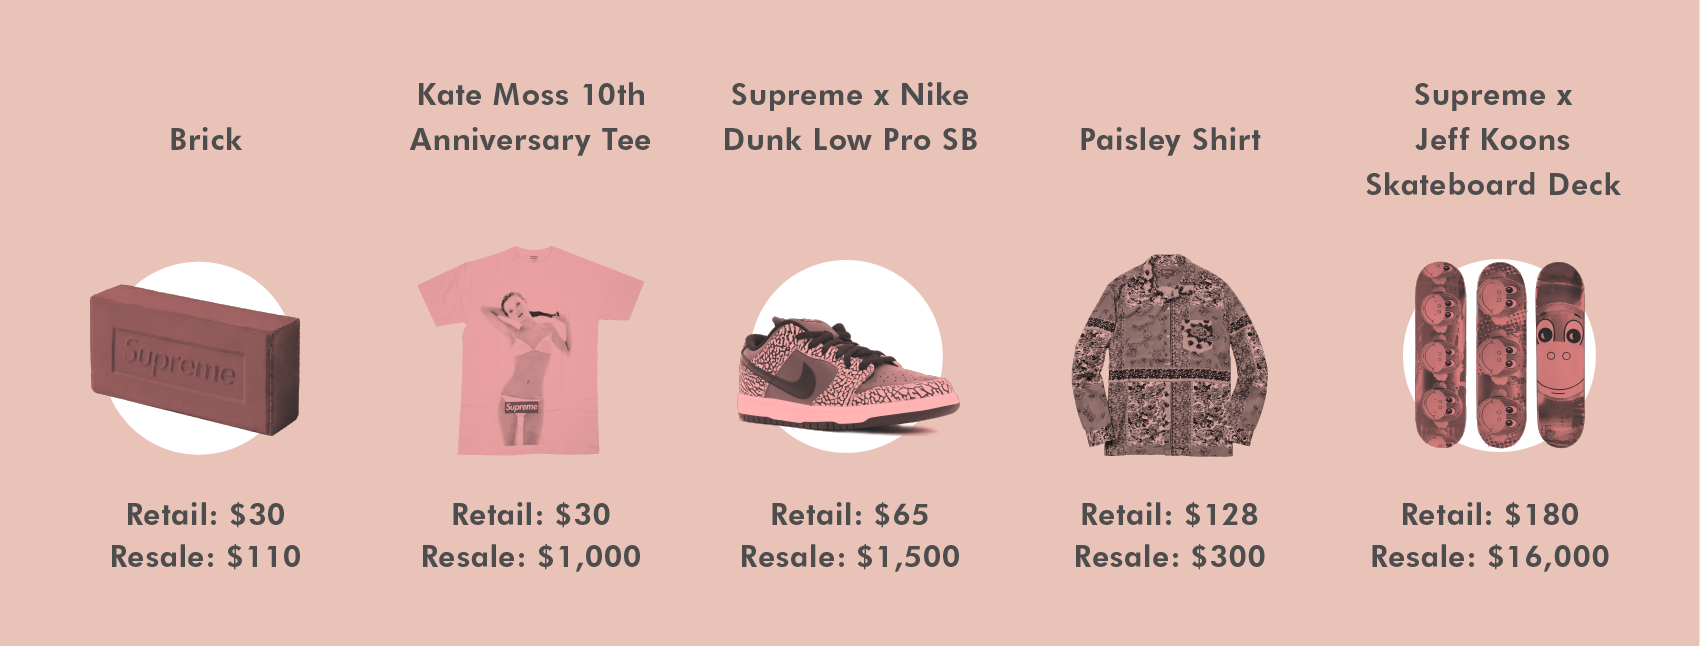 Supreme Is the Most Valuable Brand on the Resale Market, Study